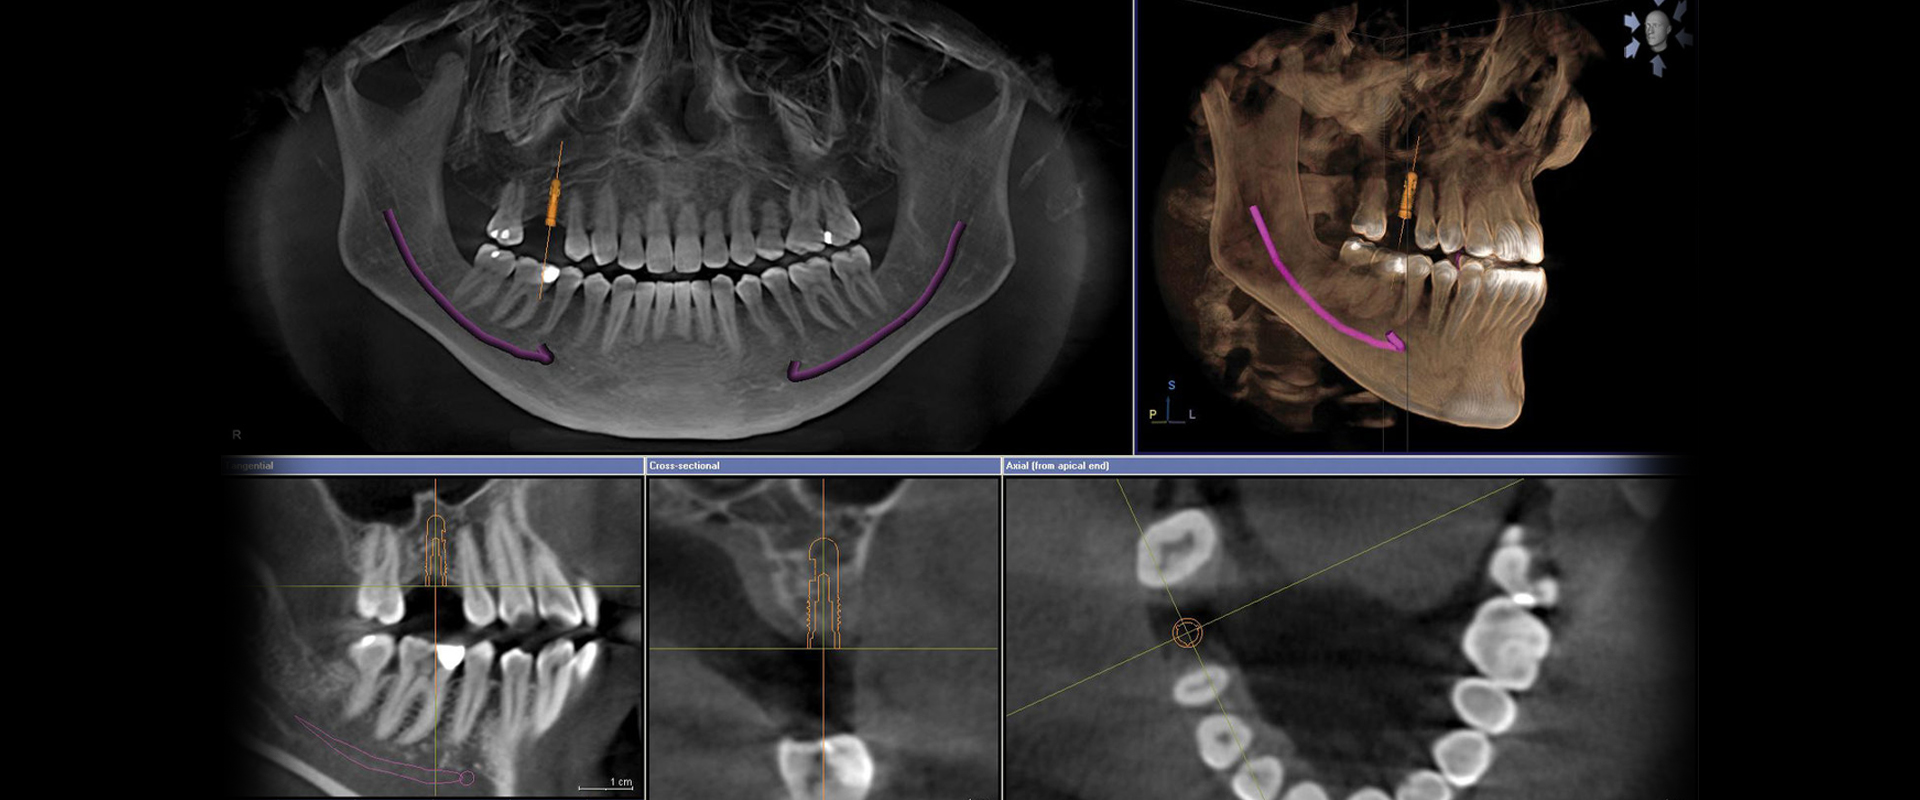 Dental Implants Utilizing State of the Art Technology